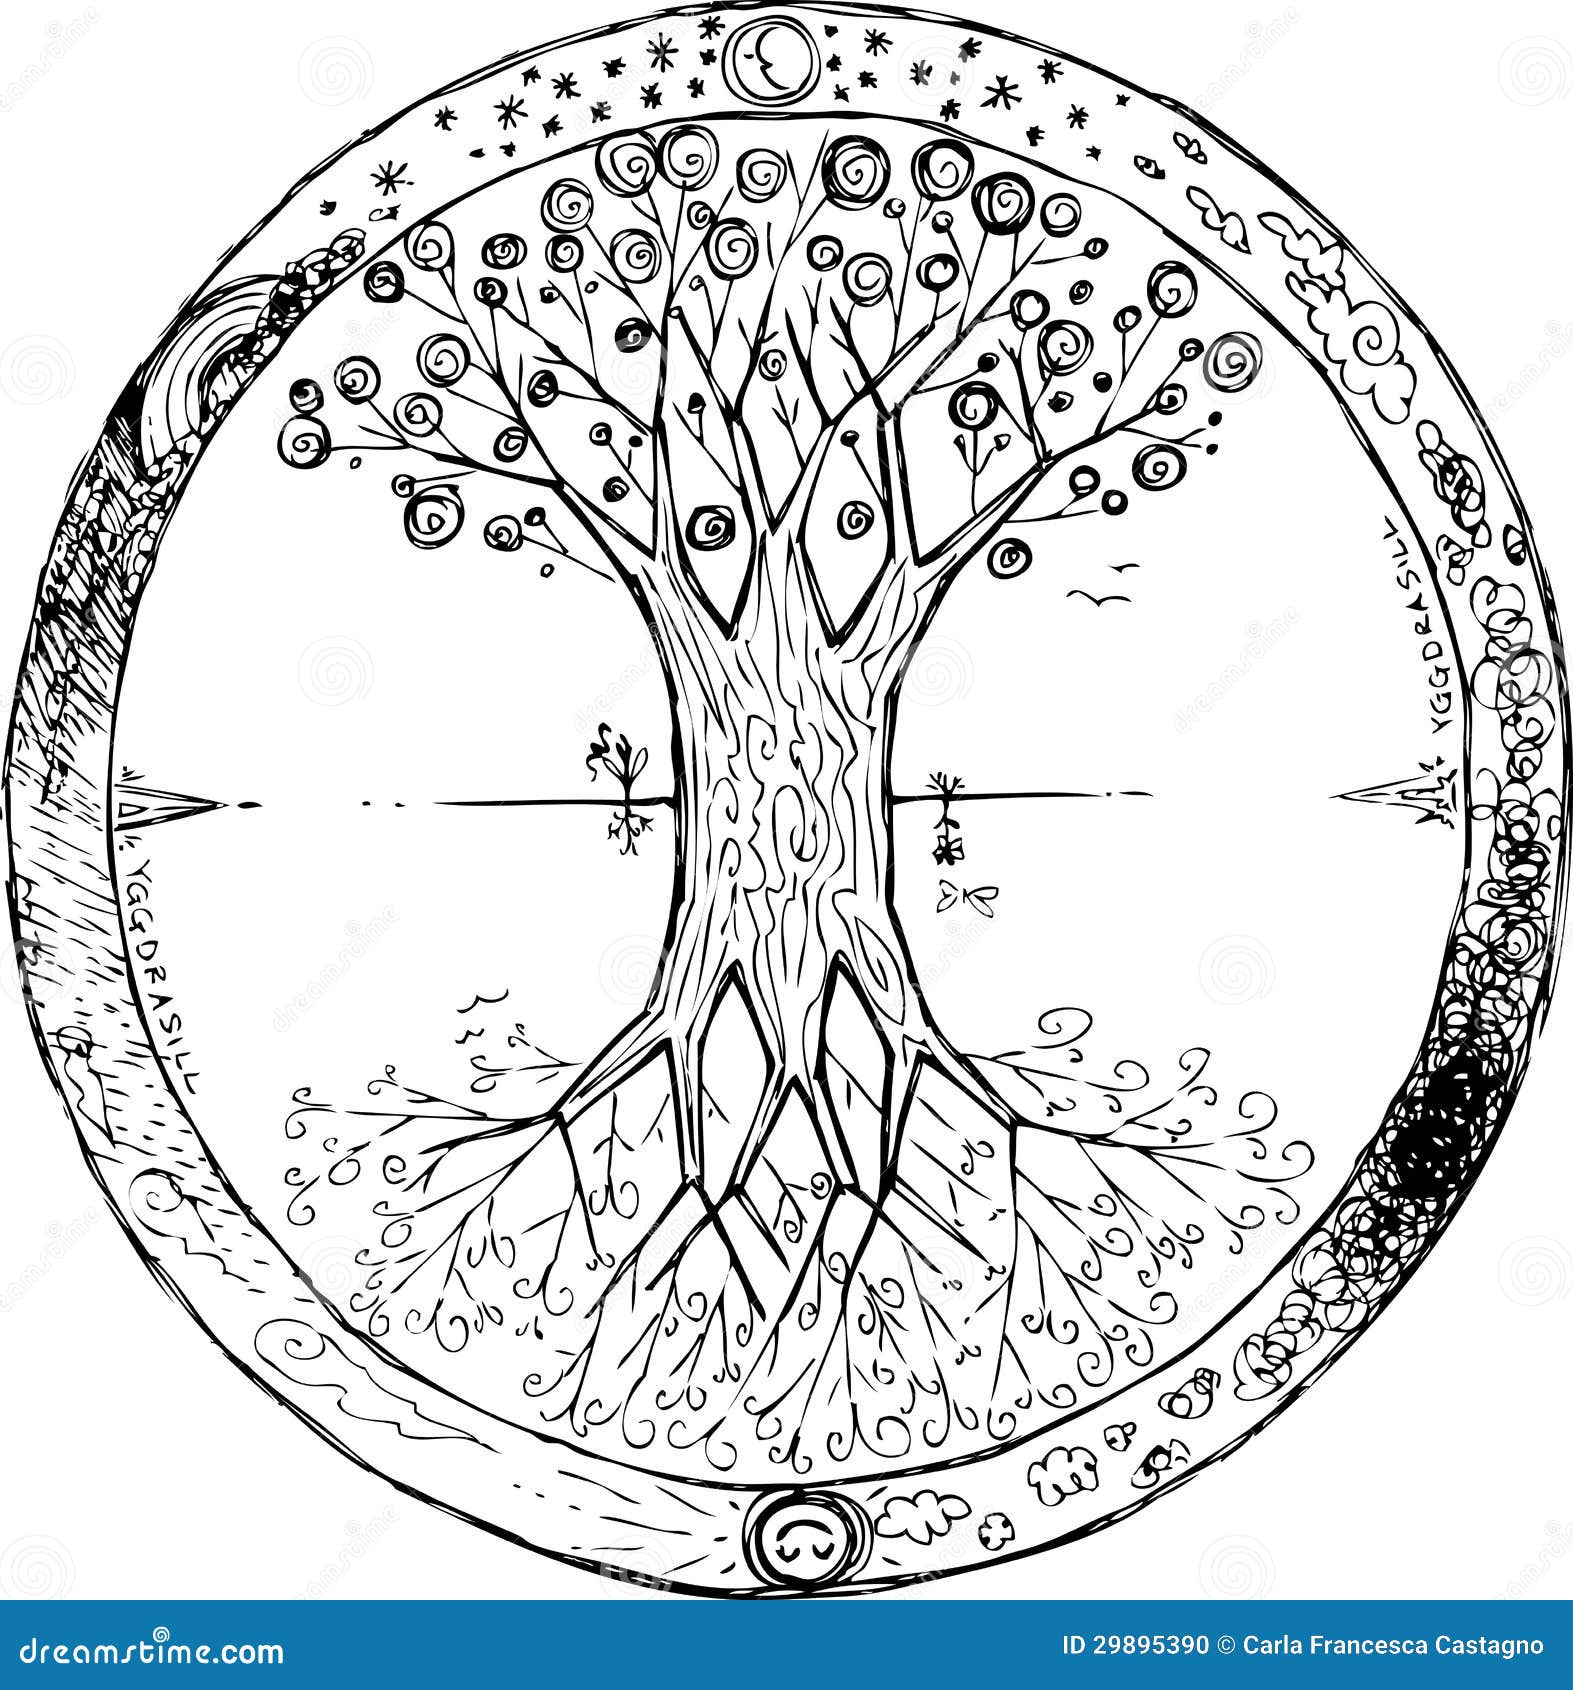 coloring yggdrasil: the celtic tree of life 